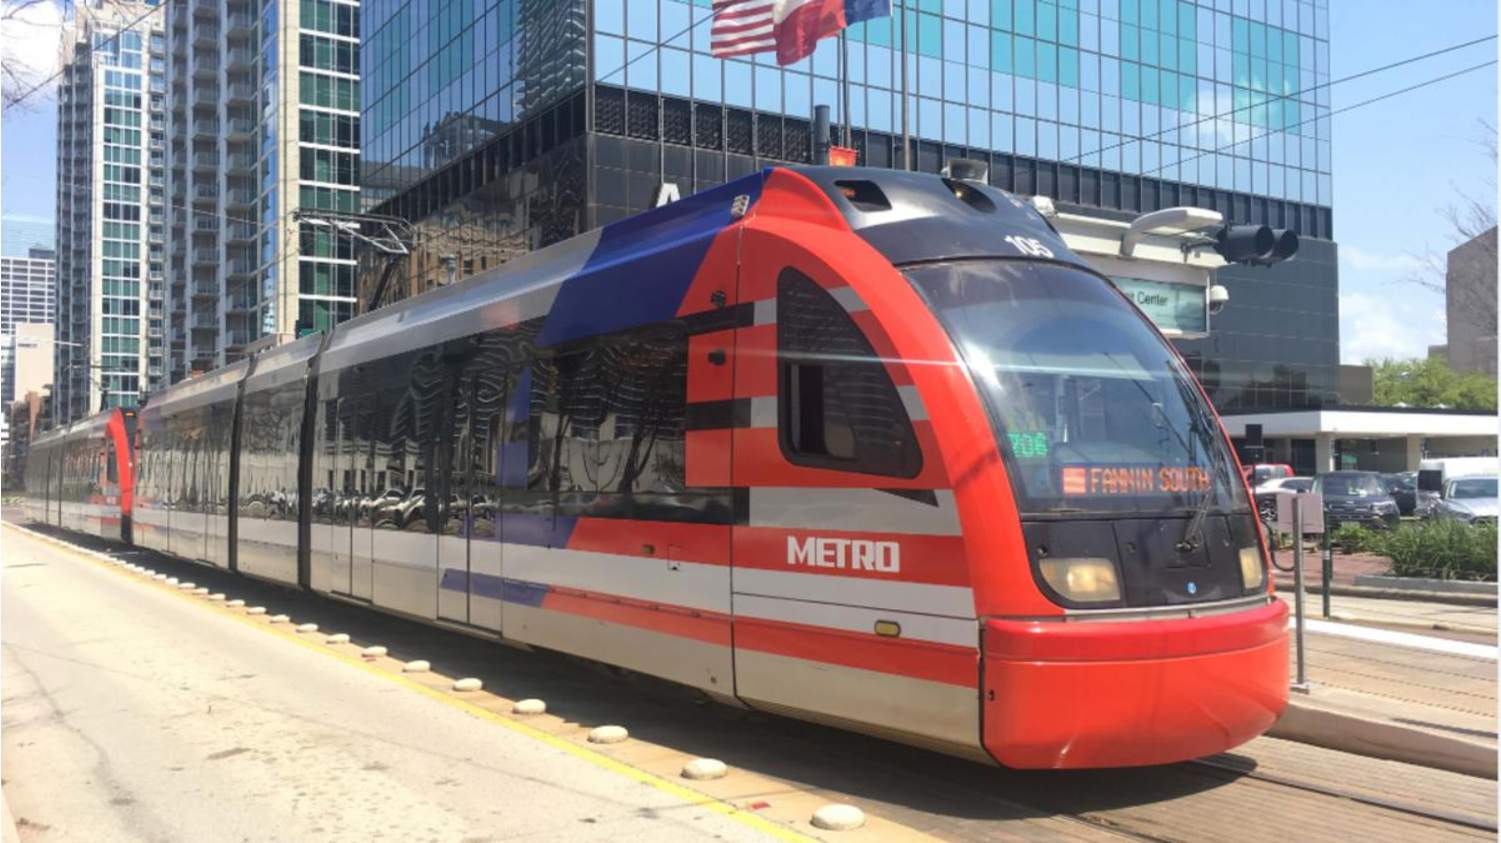 HERE 2 HELP: From free METRO rides to free oil changes and discounts, how to get around Houston in low-cost ways